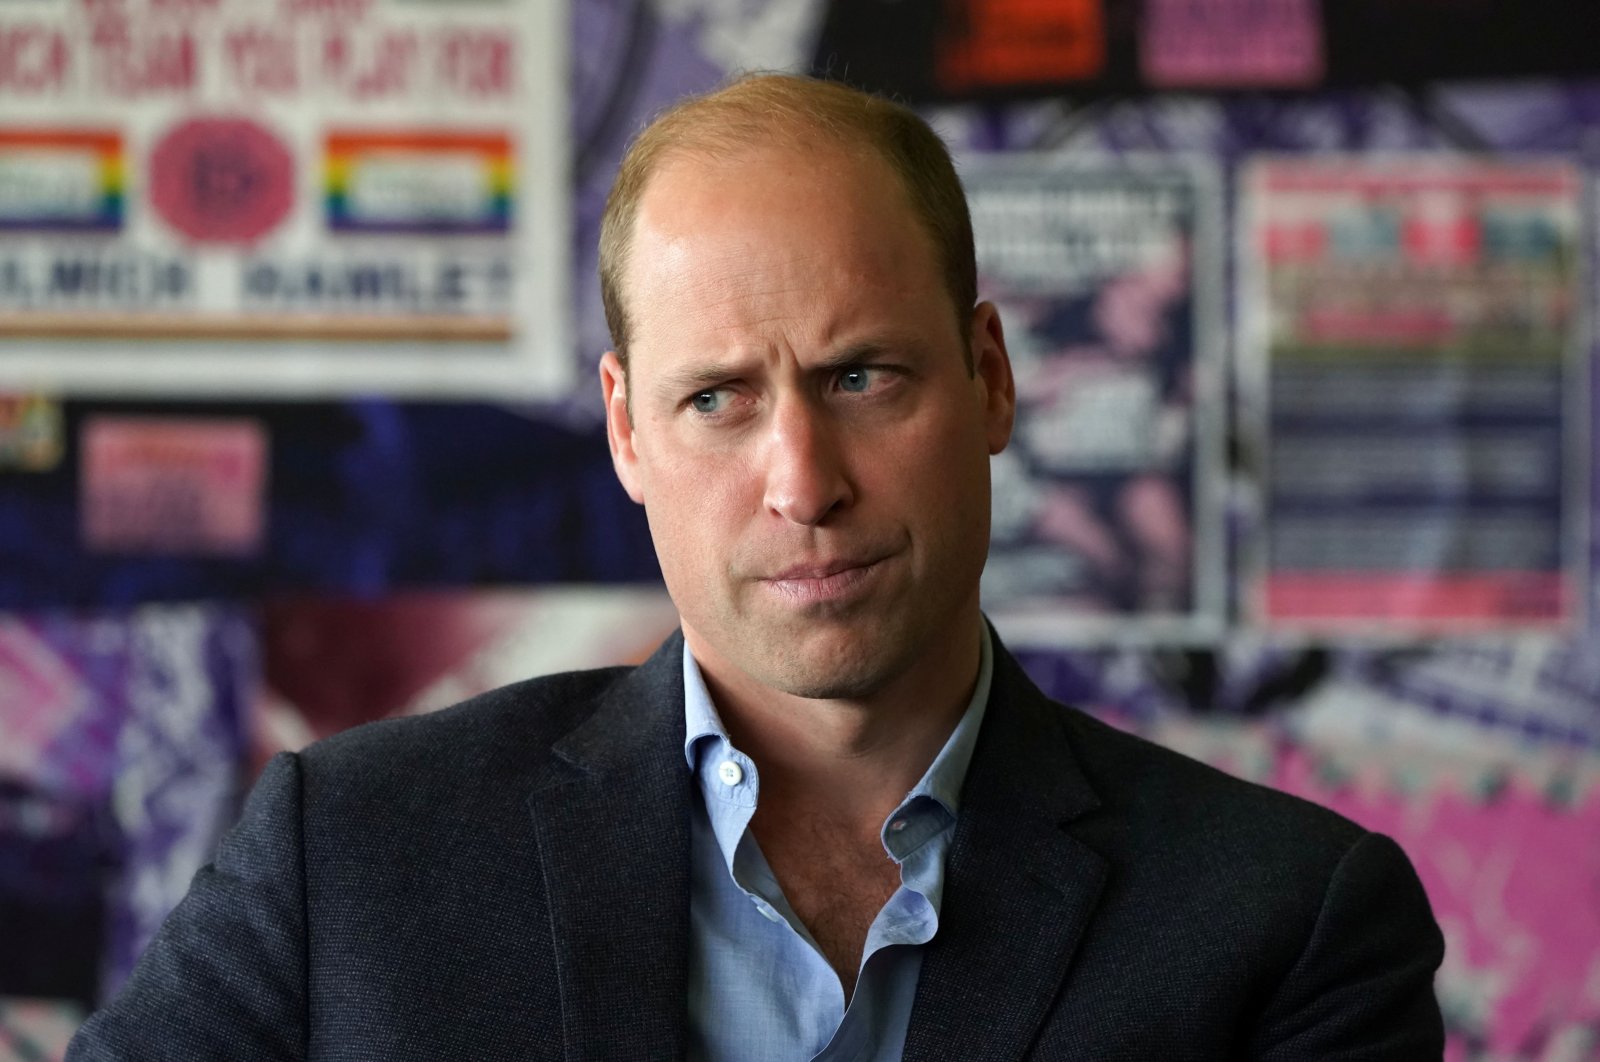 Britain's Prince William, president of the Football Association, visits Dulwich Hamlet FC at the Champion Hill Stadium in London, Britain Sep. 23, 2021. (Kirsty O'Connor/Pool via Reuters) 